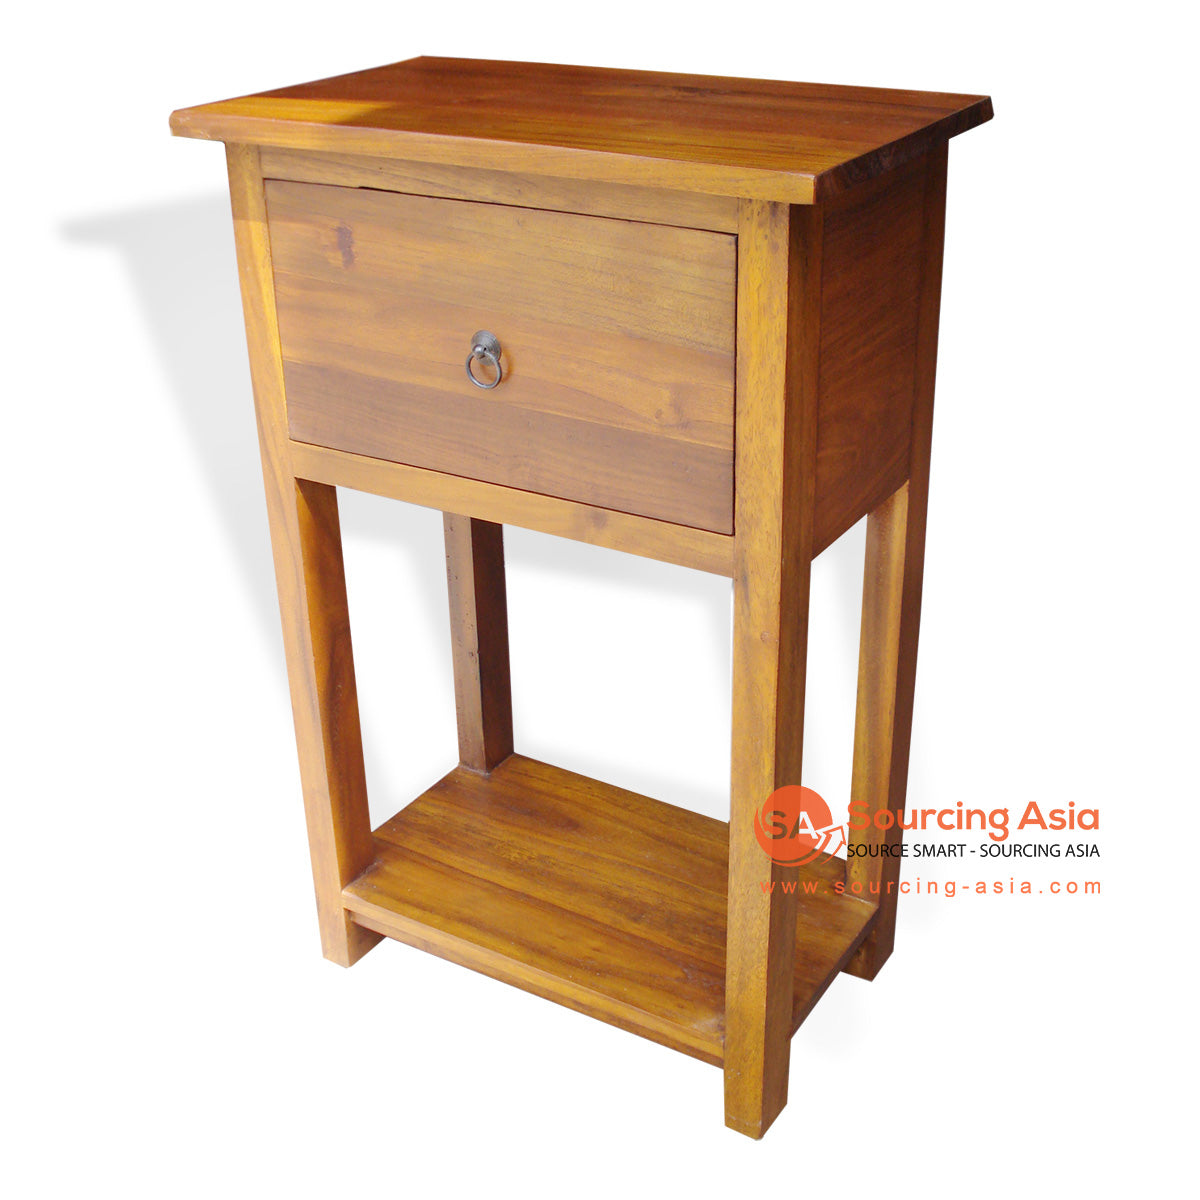 TRG-SPMD001 NATURAL RECYCLED TEAK WOOD ONE DRAWER AND SHELF SIDE TABLE